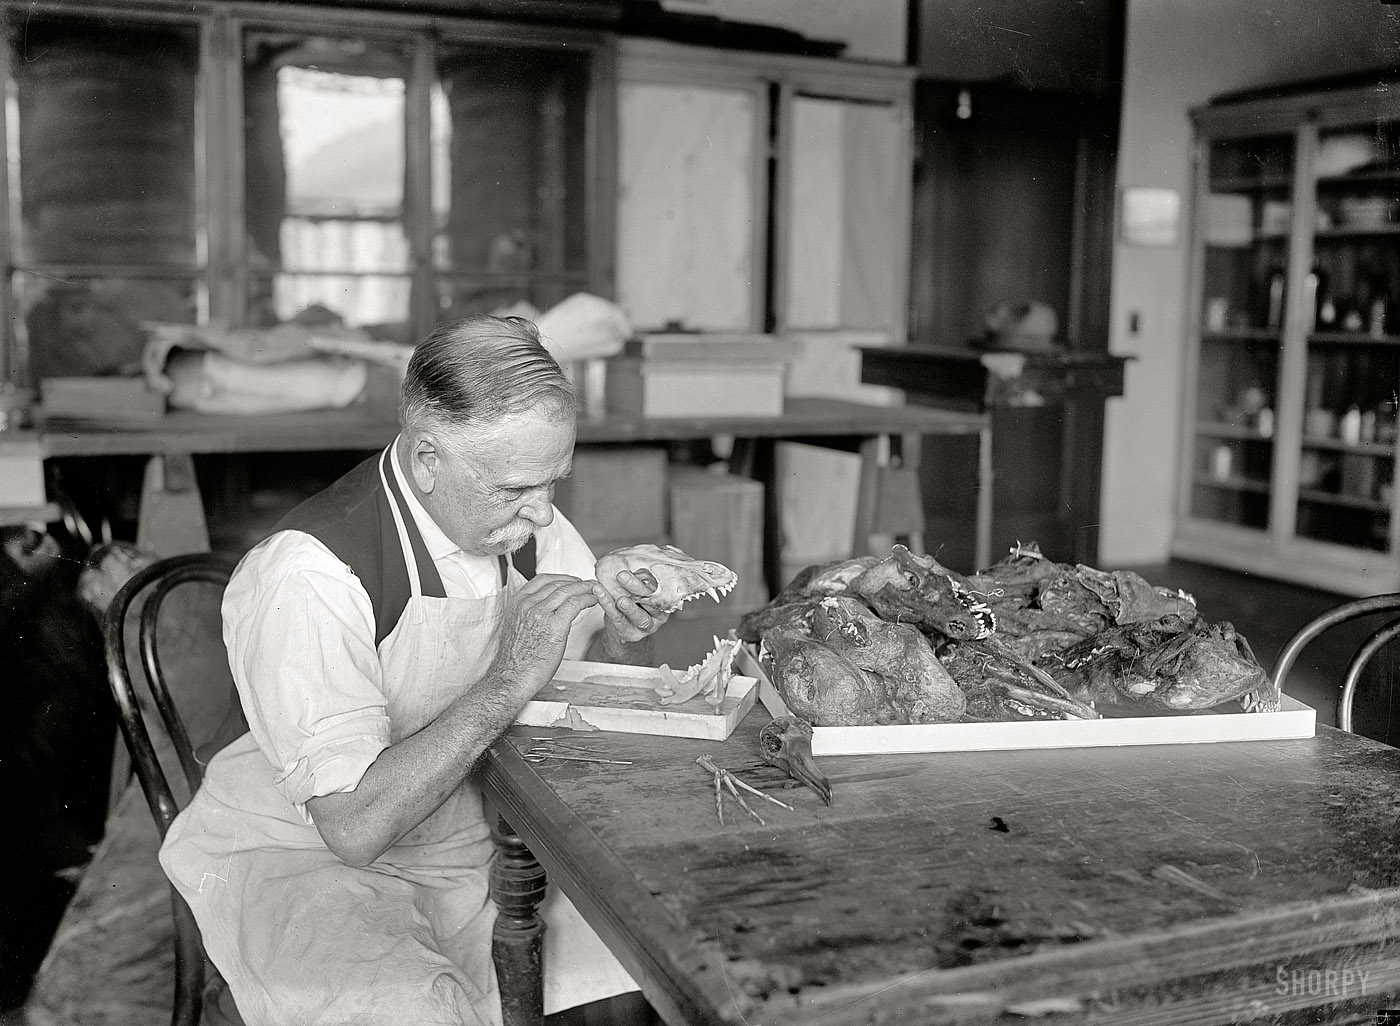 May 7, 1923. "Joseph W. Schollick." Whose name is also attached to this photo of a similar-looking but evidently different person, George Marshall, also seen here on Shorpy. My guess is that somehow the "osteologist" caption got attached to a photo of the taxidermist because these two look so much alike. National Photo Company Collection glass negative. View full size.